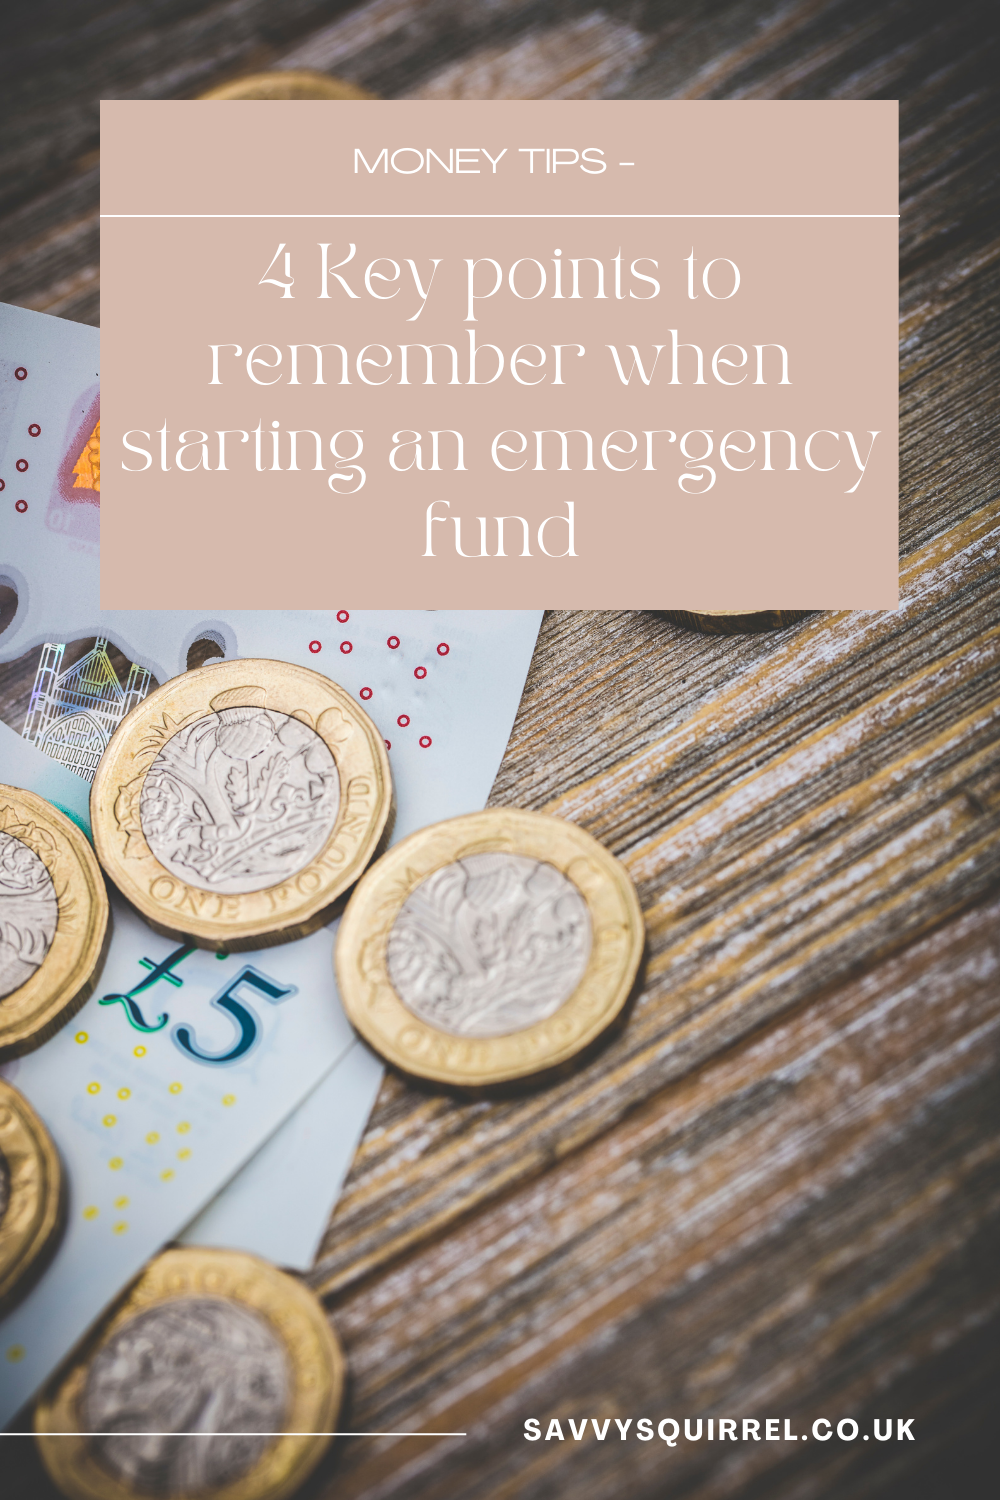 4 Key points to remember when starting an emergency fund